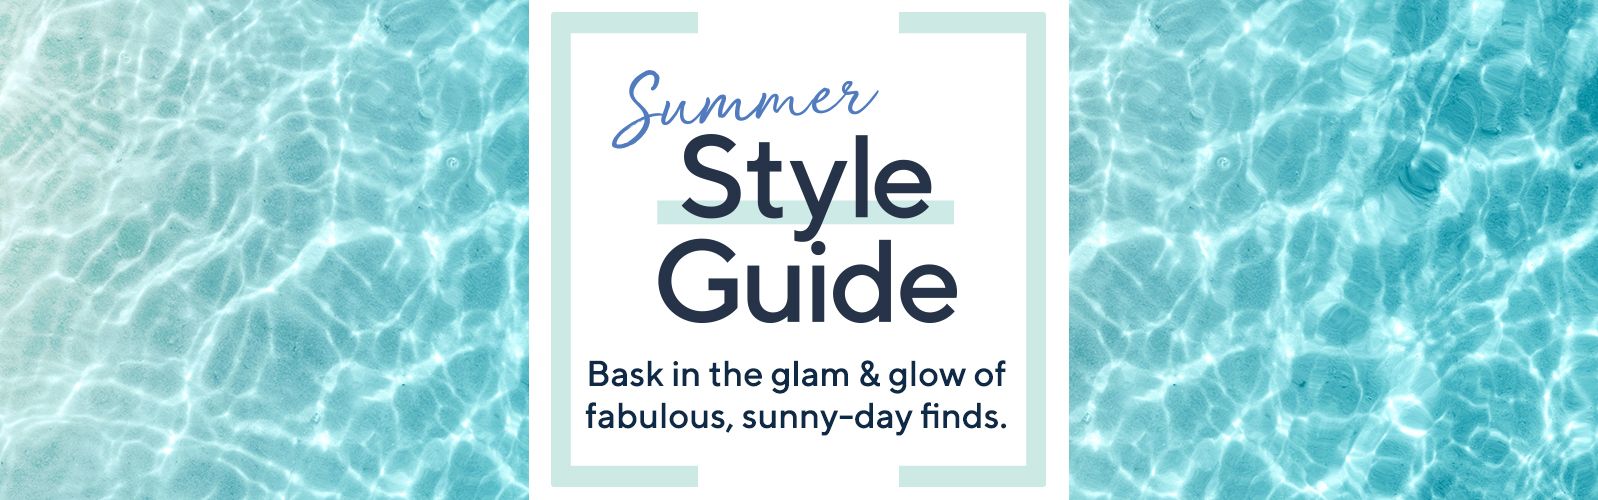 Summer Style Guide Bask in the glam & glow of fabulous, sunny-day finds.